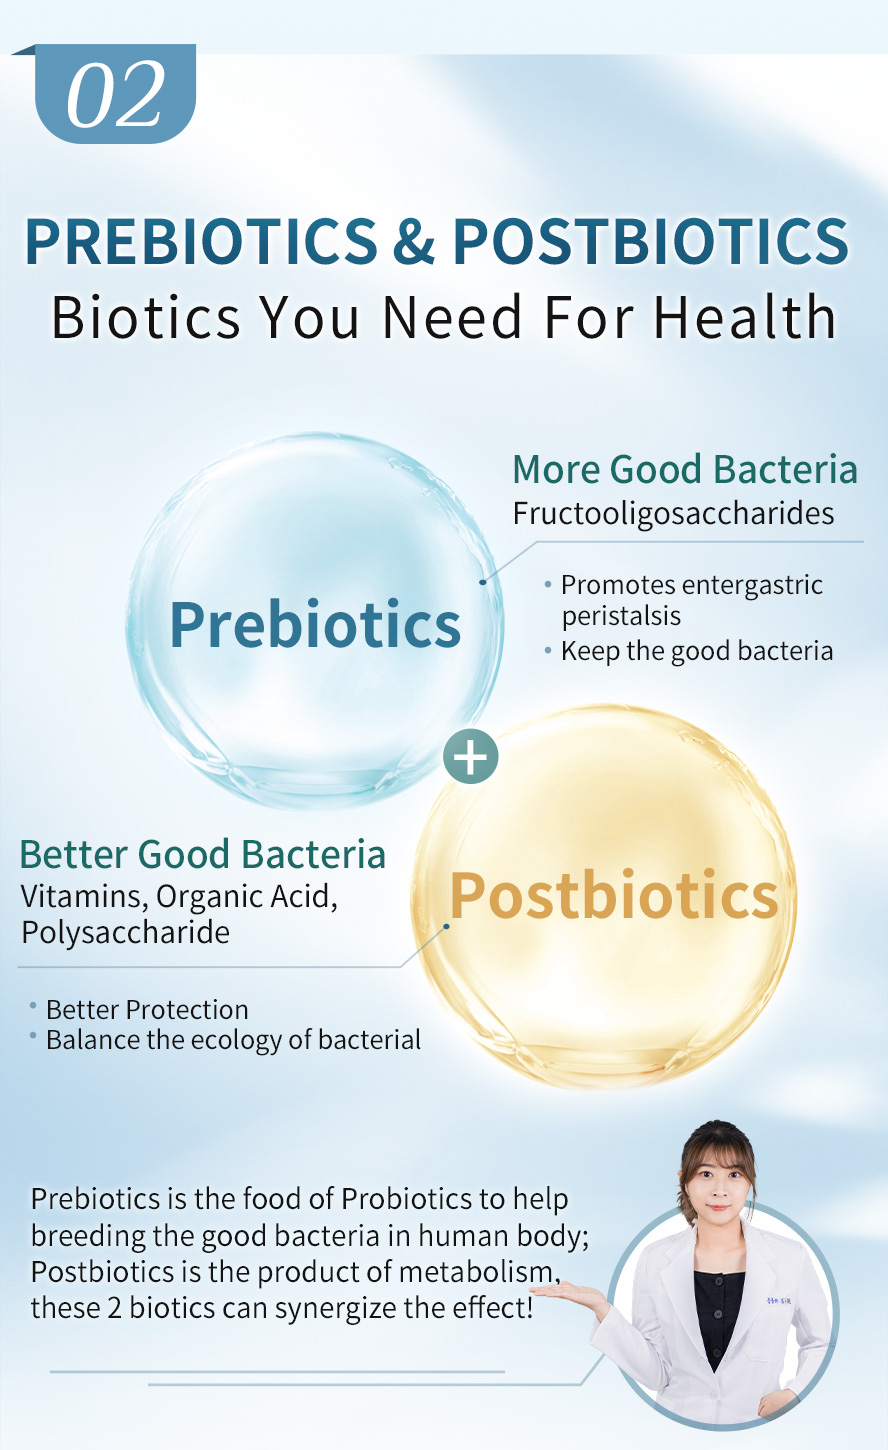 Prebiotic & postbiotic to breed better & more bacteria in humanb body which will synergize the effect of BHK's 300 Billion Probiotic